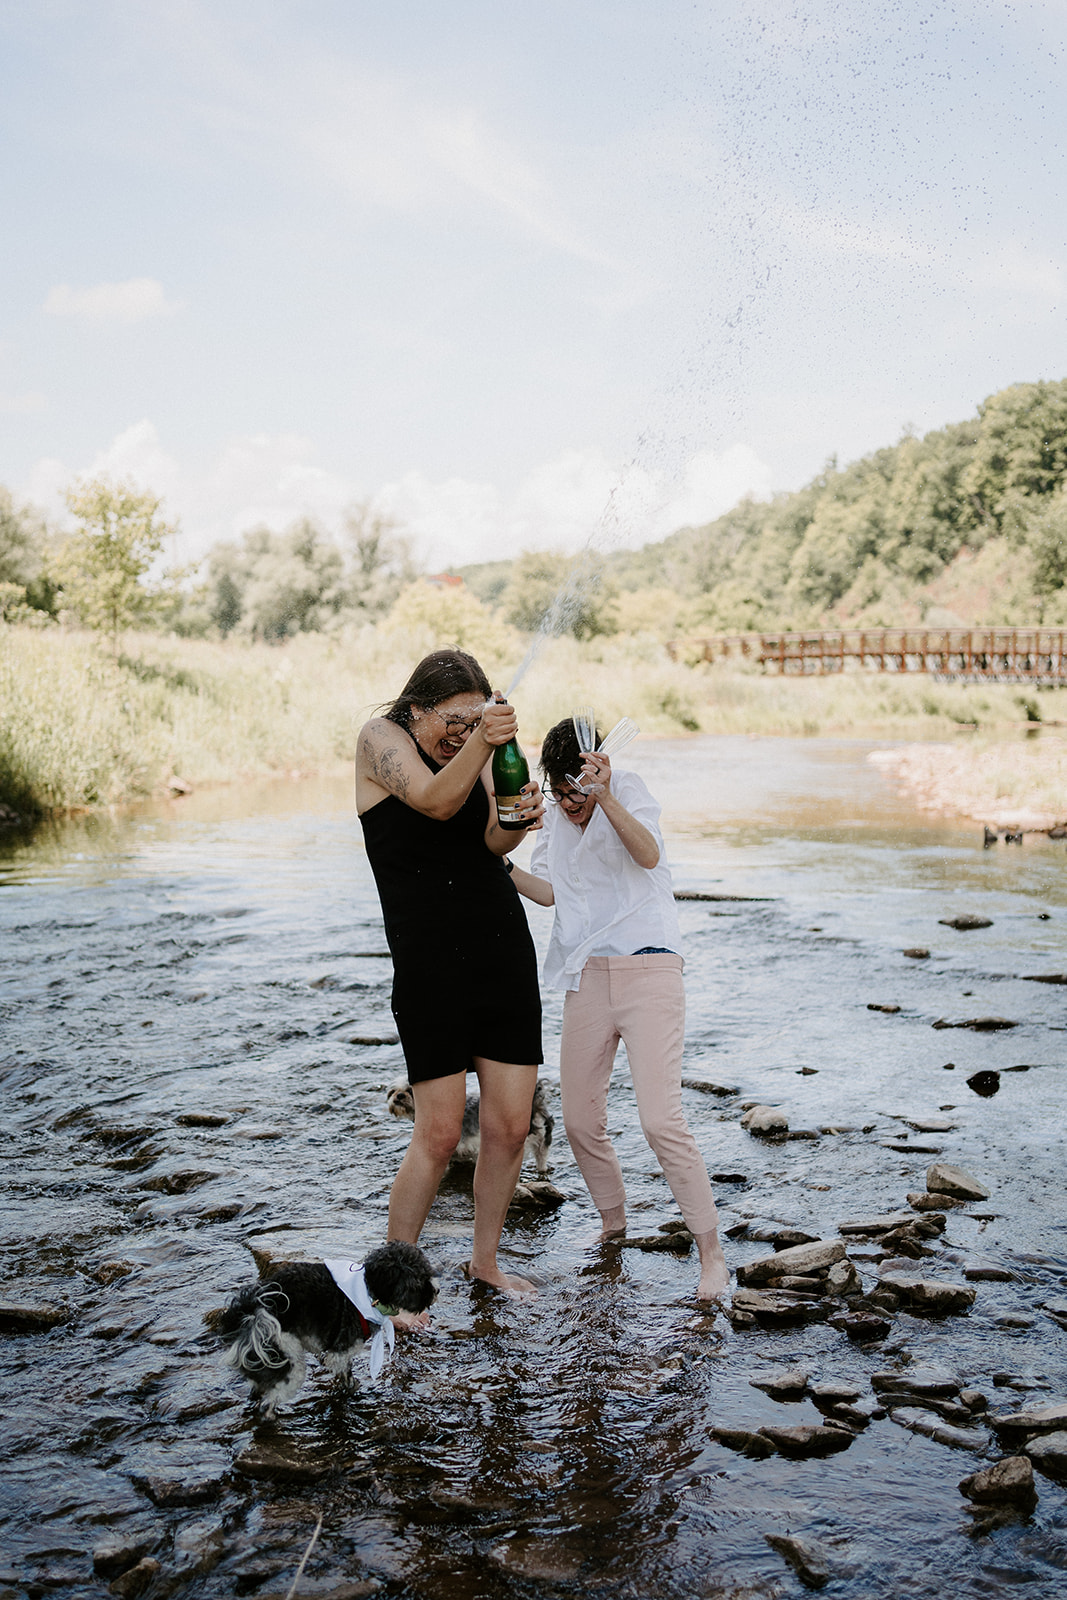 Two people standing on rocks in water while one opens champagne. 